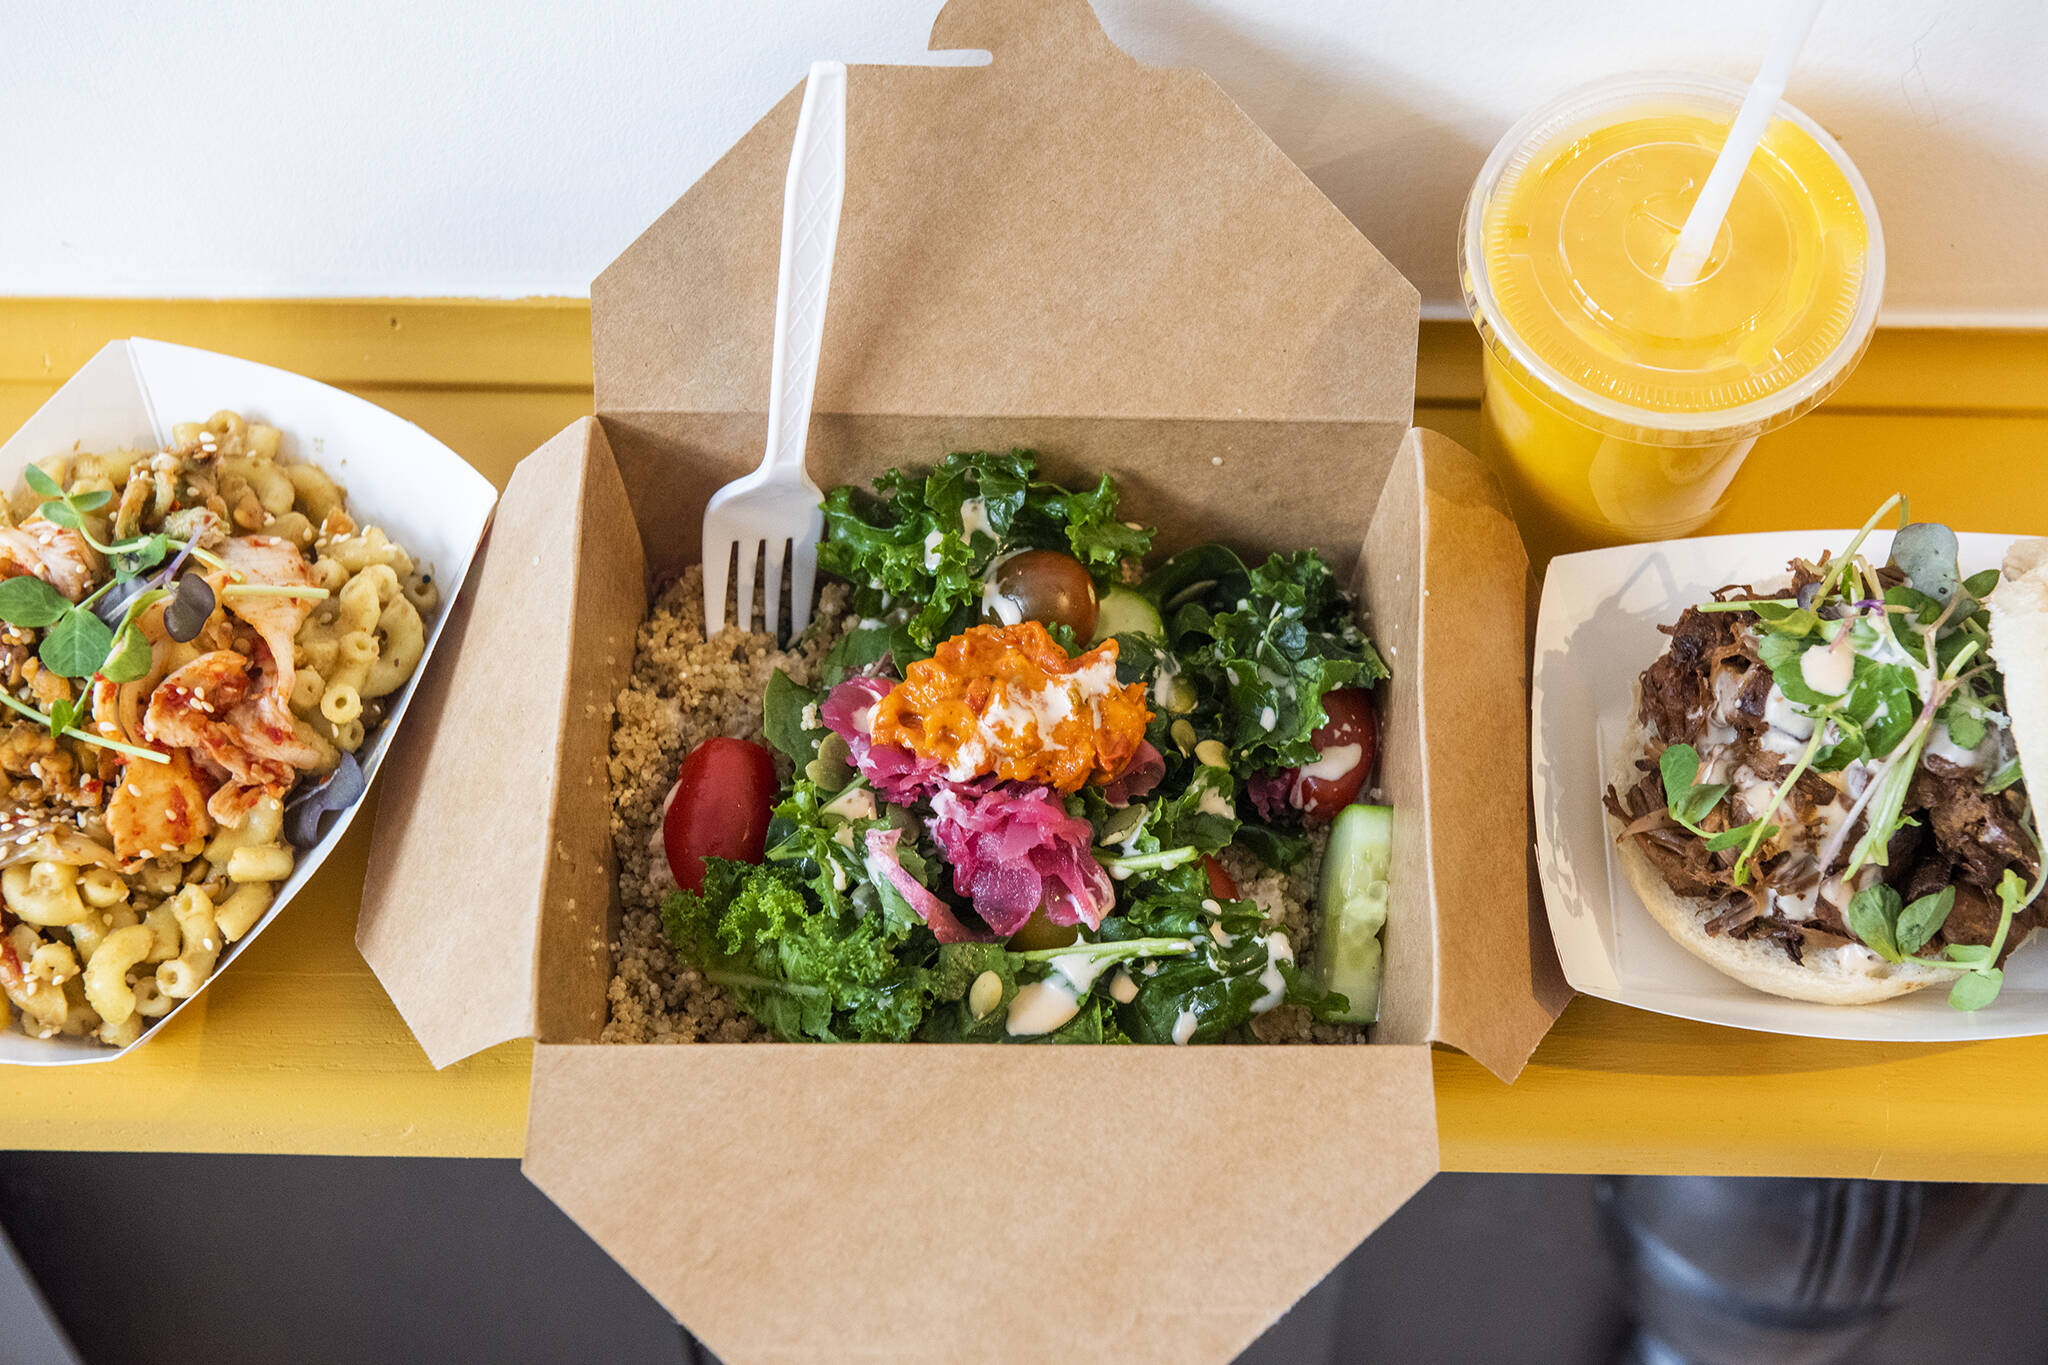 Vegan takeout joint closes in Toronto after being open for about 7 months